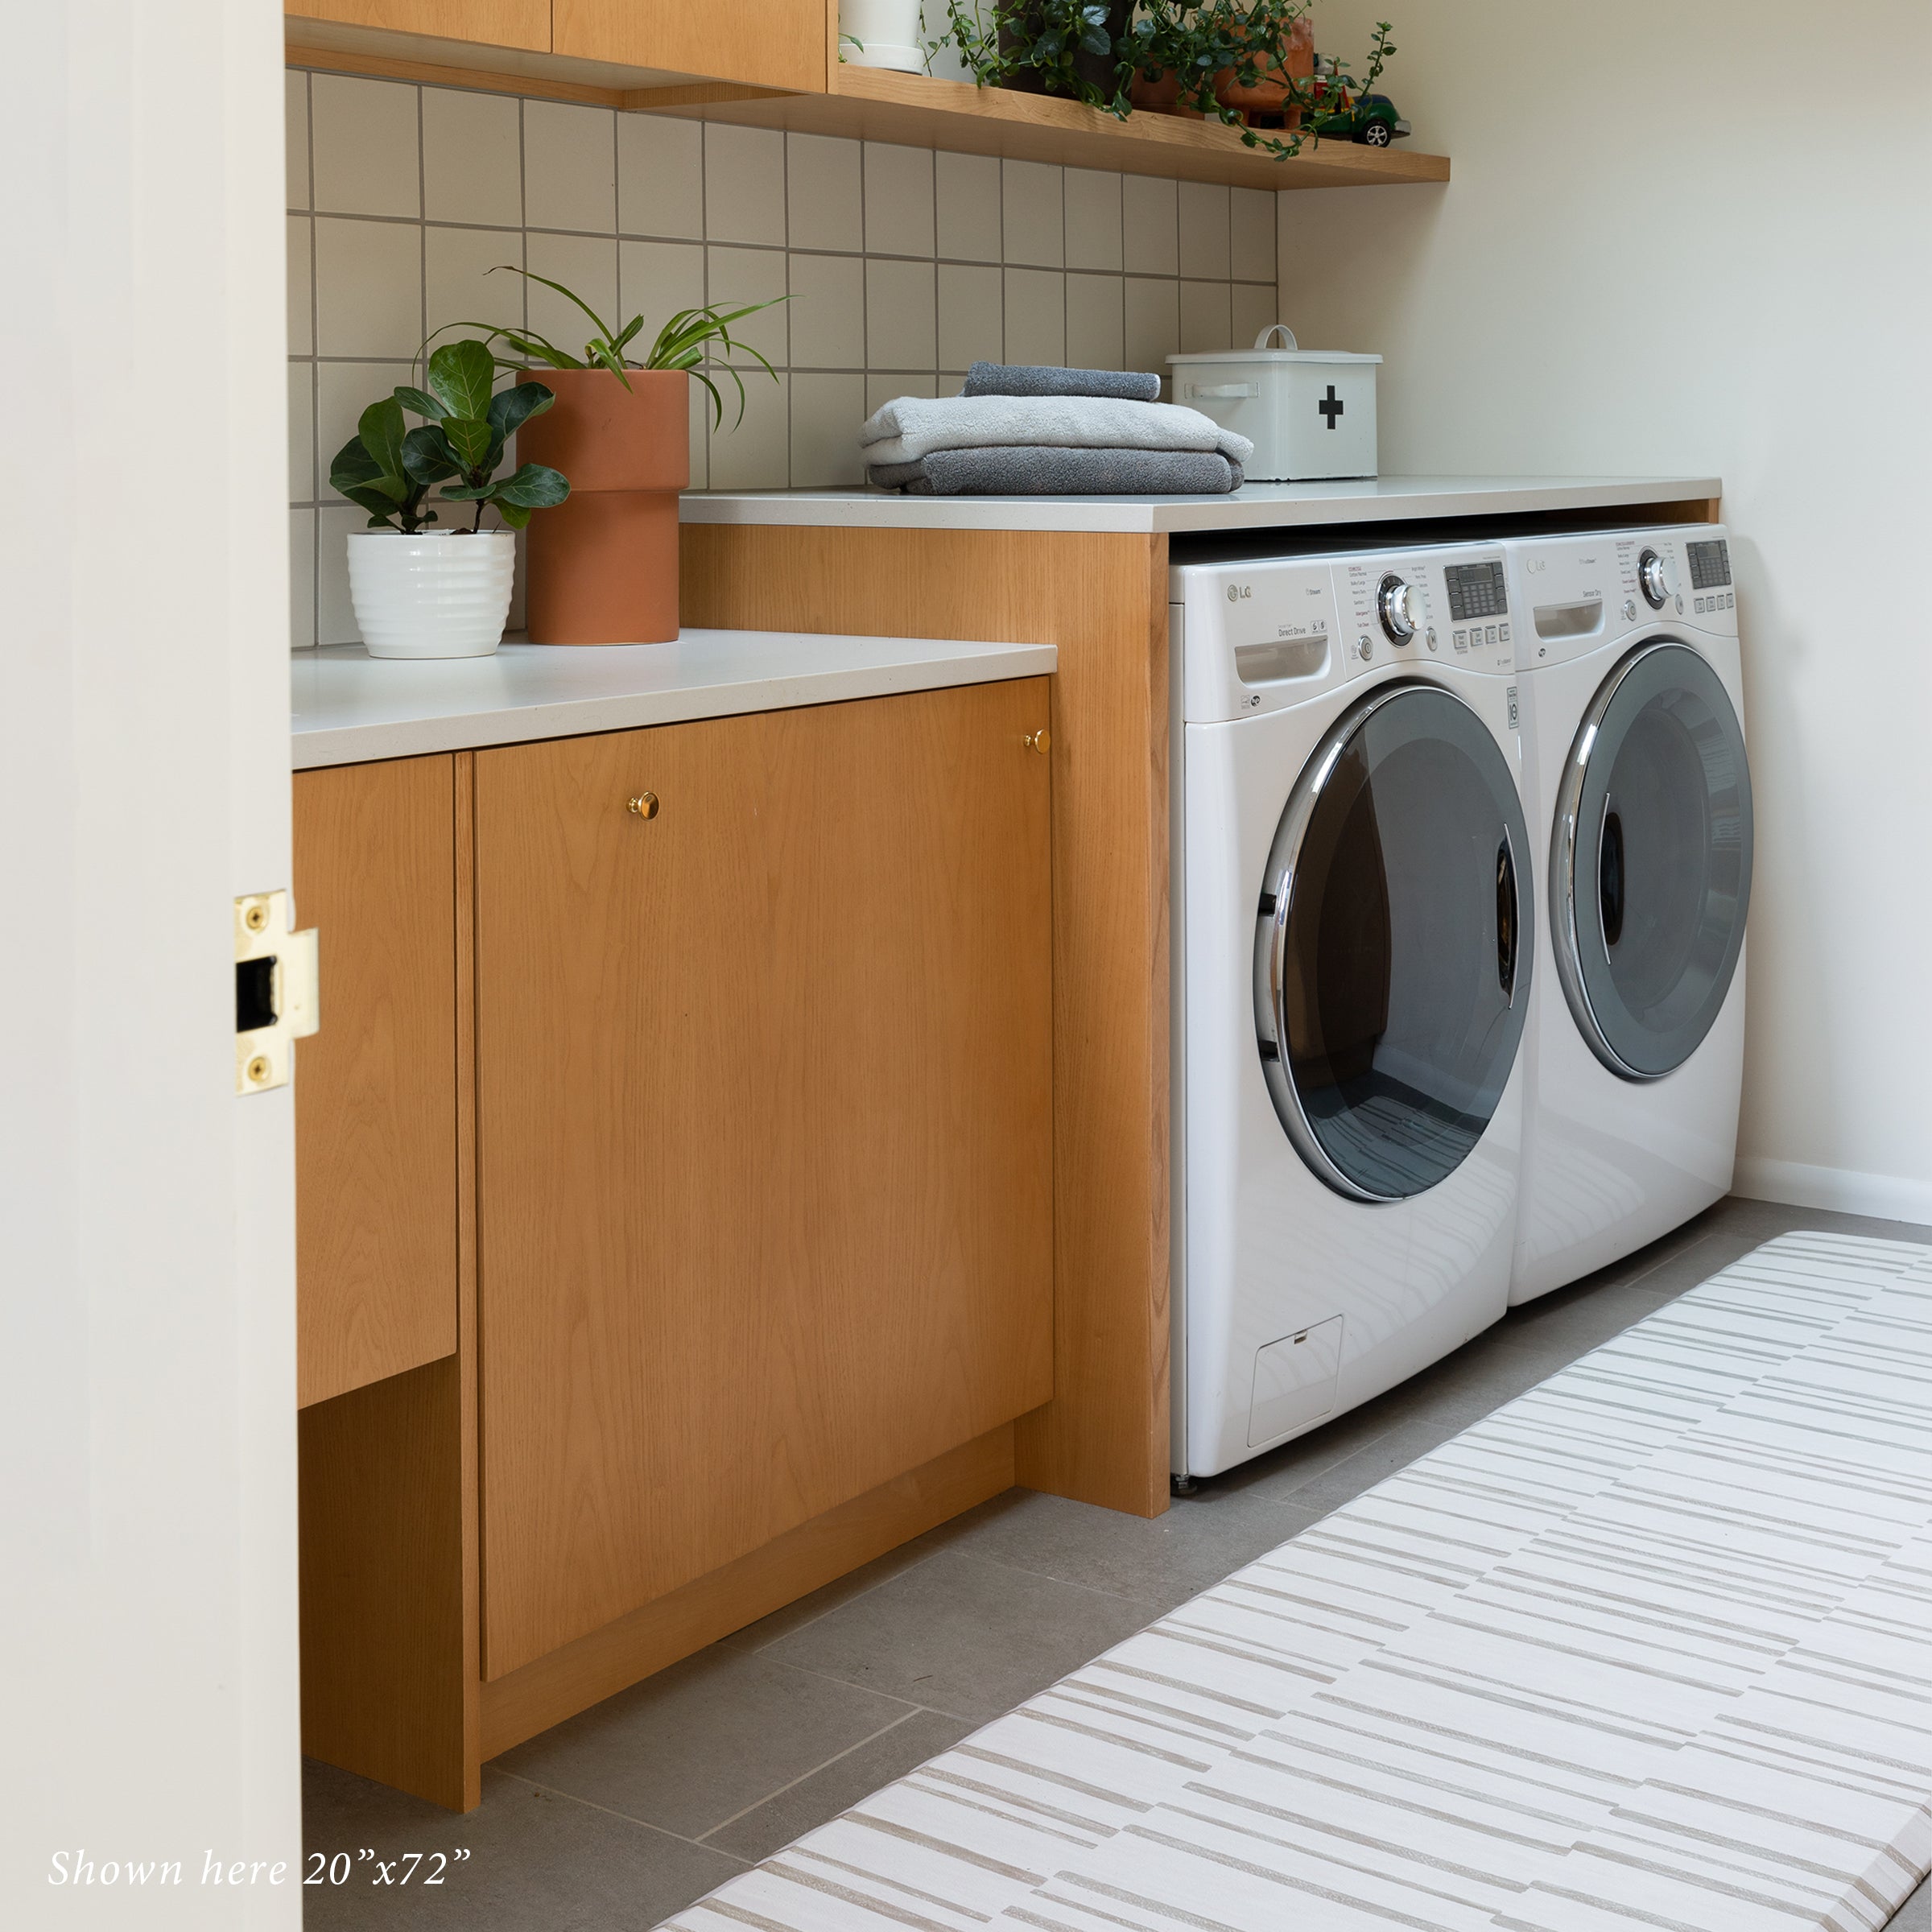 Beige Natural Minimal Inverted Stripe Print Standing Mat with in laundry room in size 20x72